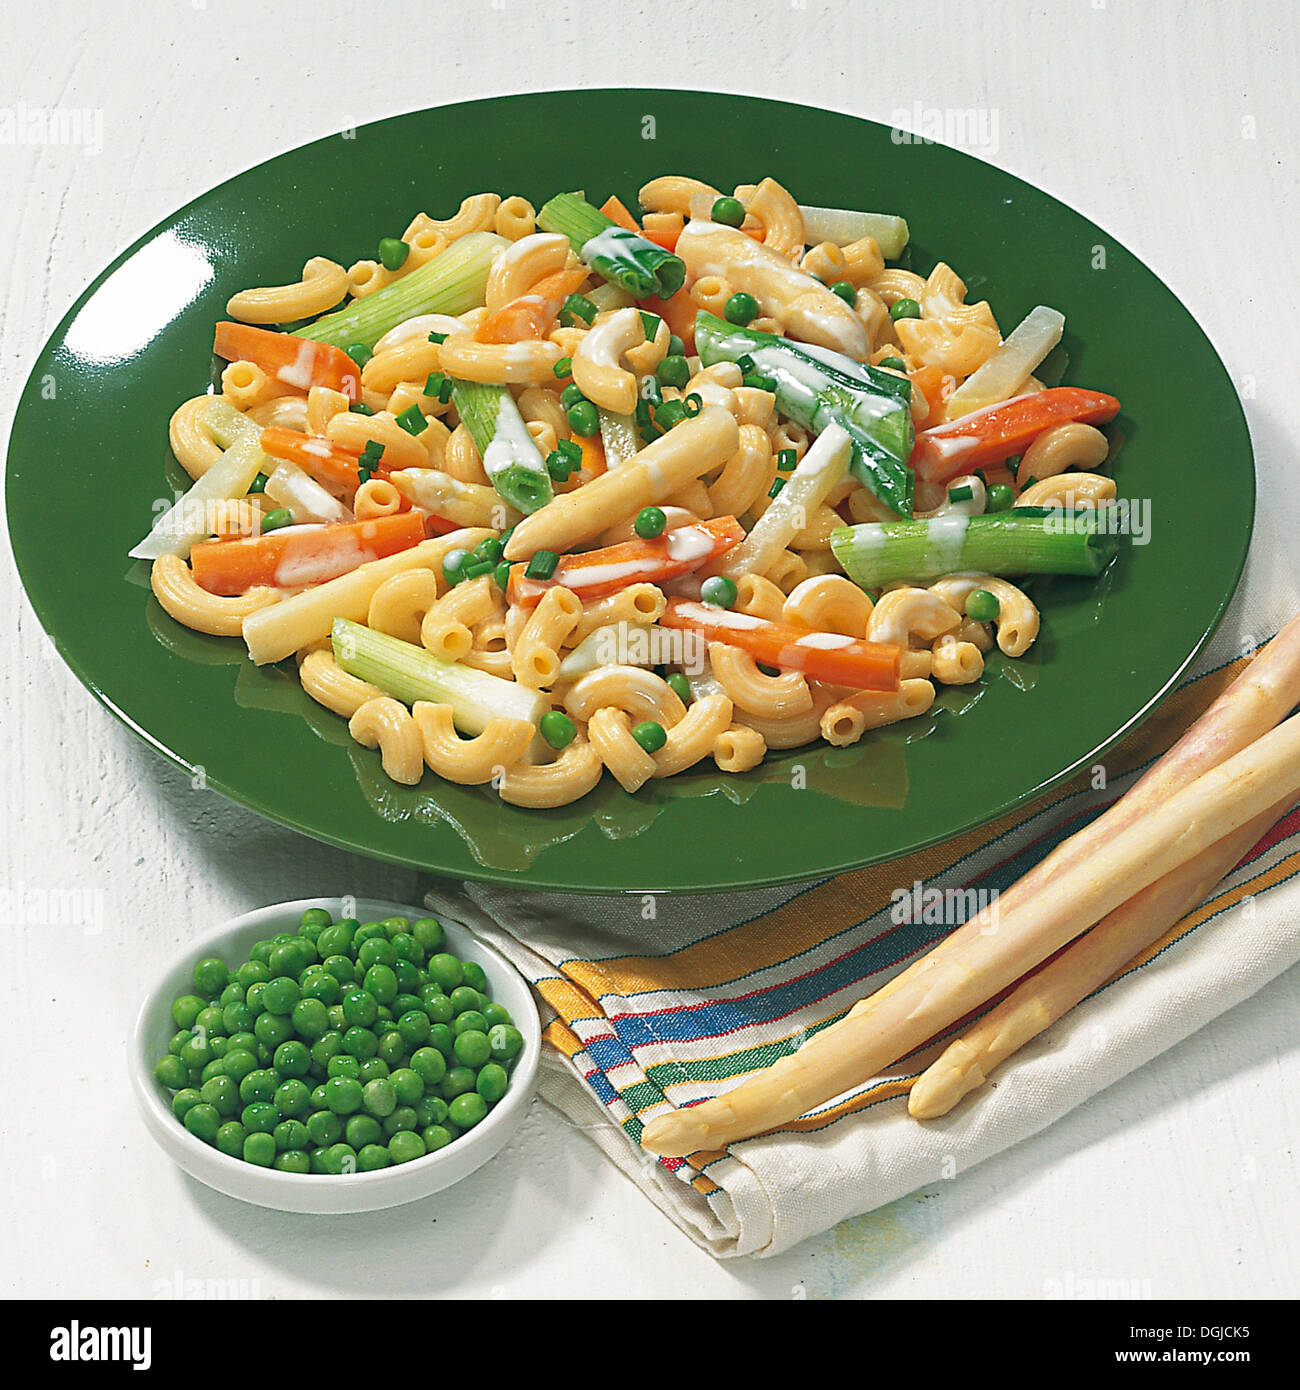 Pasta salad with spring vegetables, Germany. Stock Photo